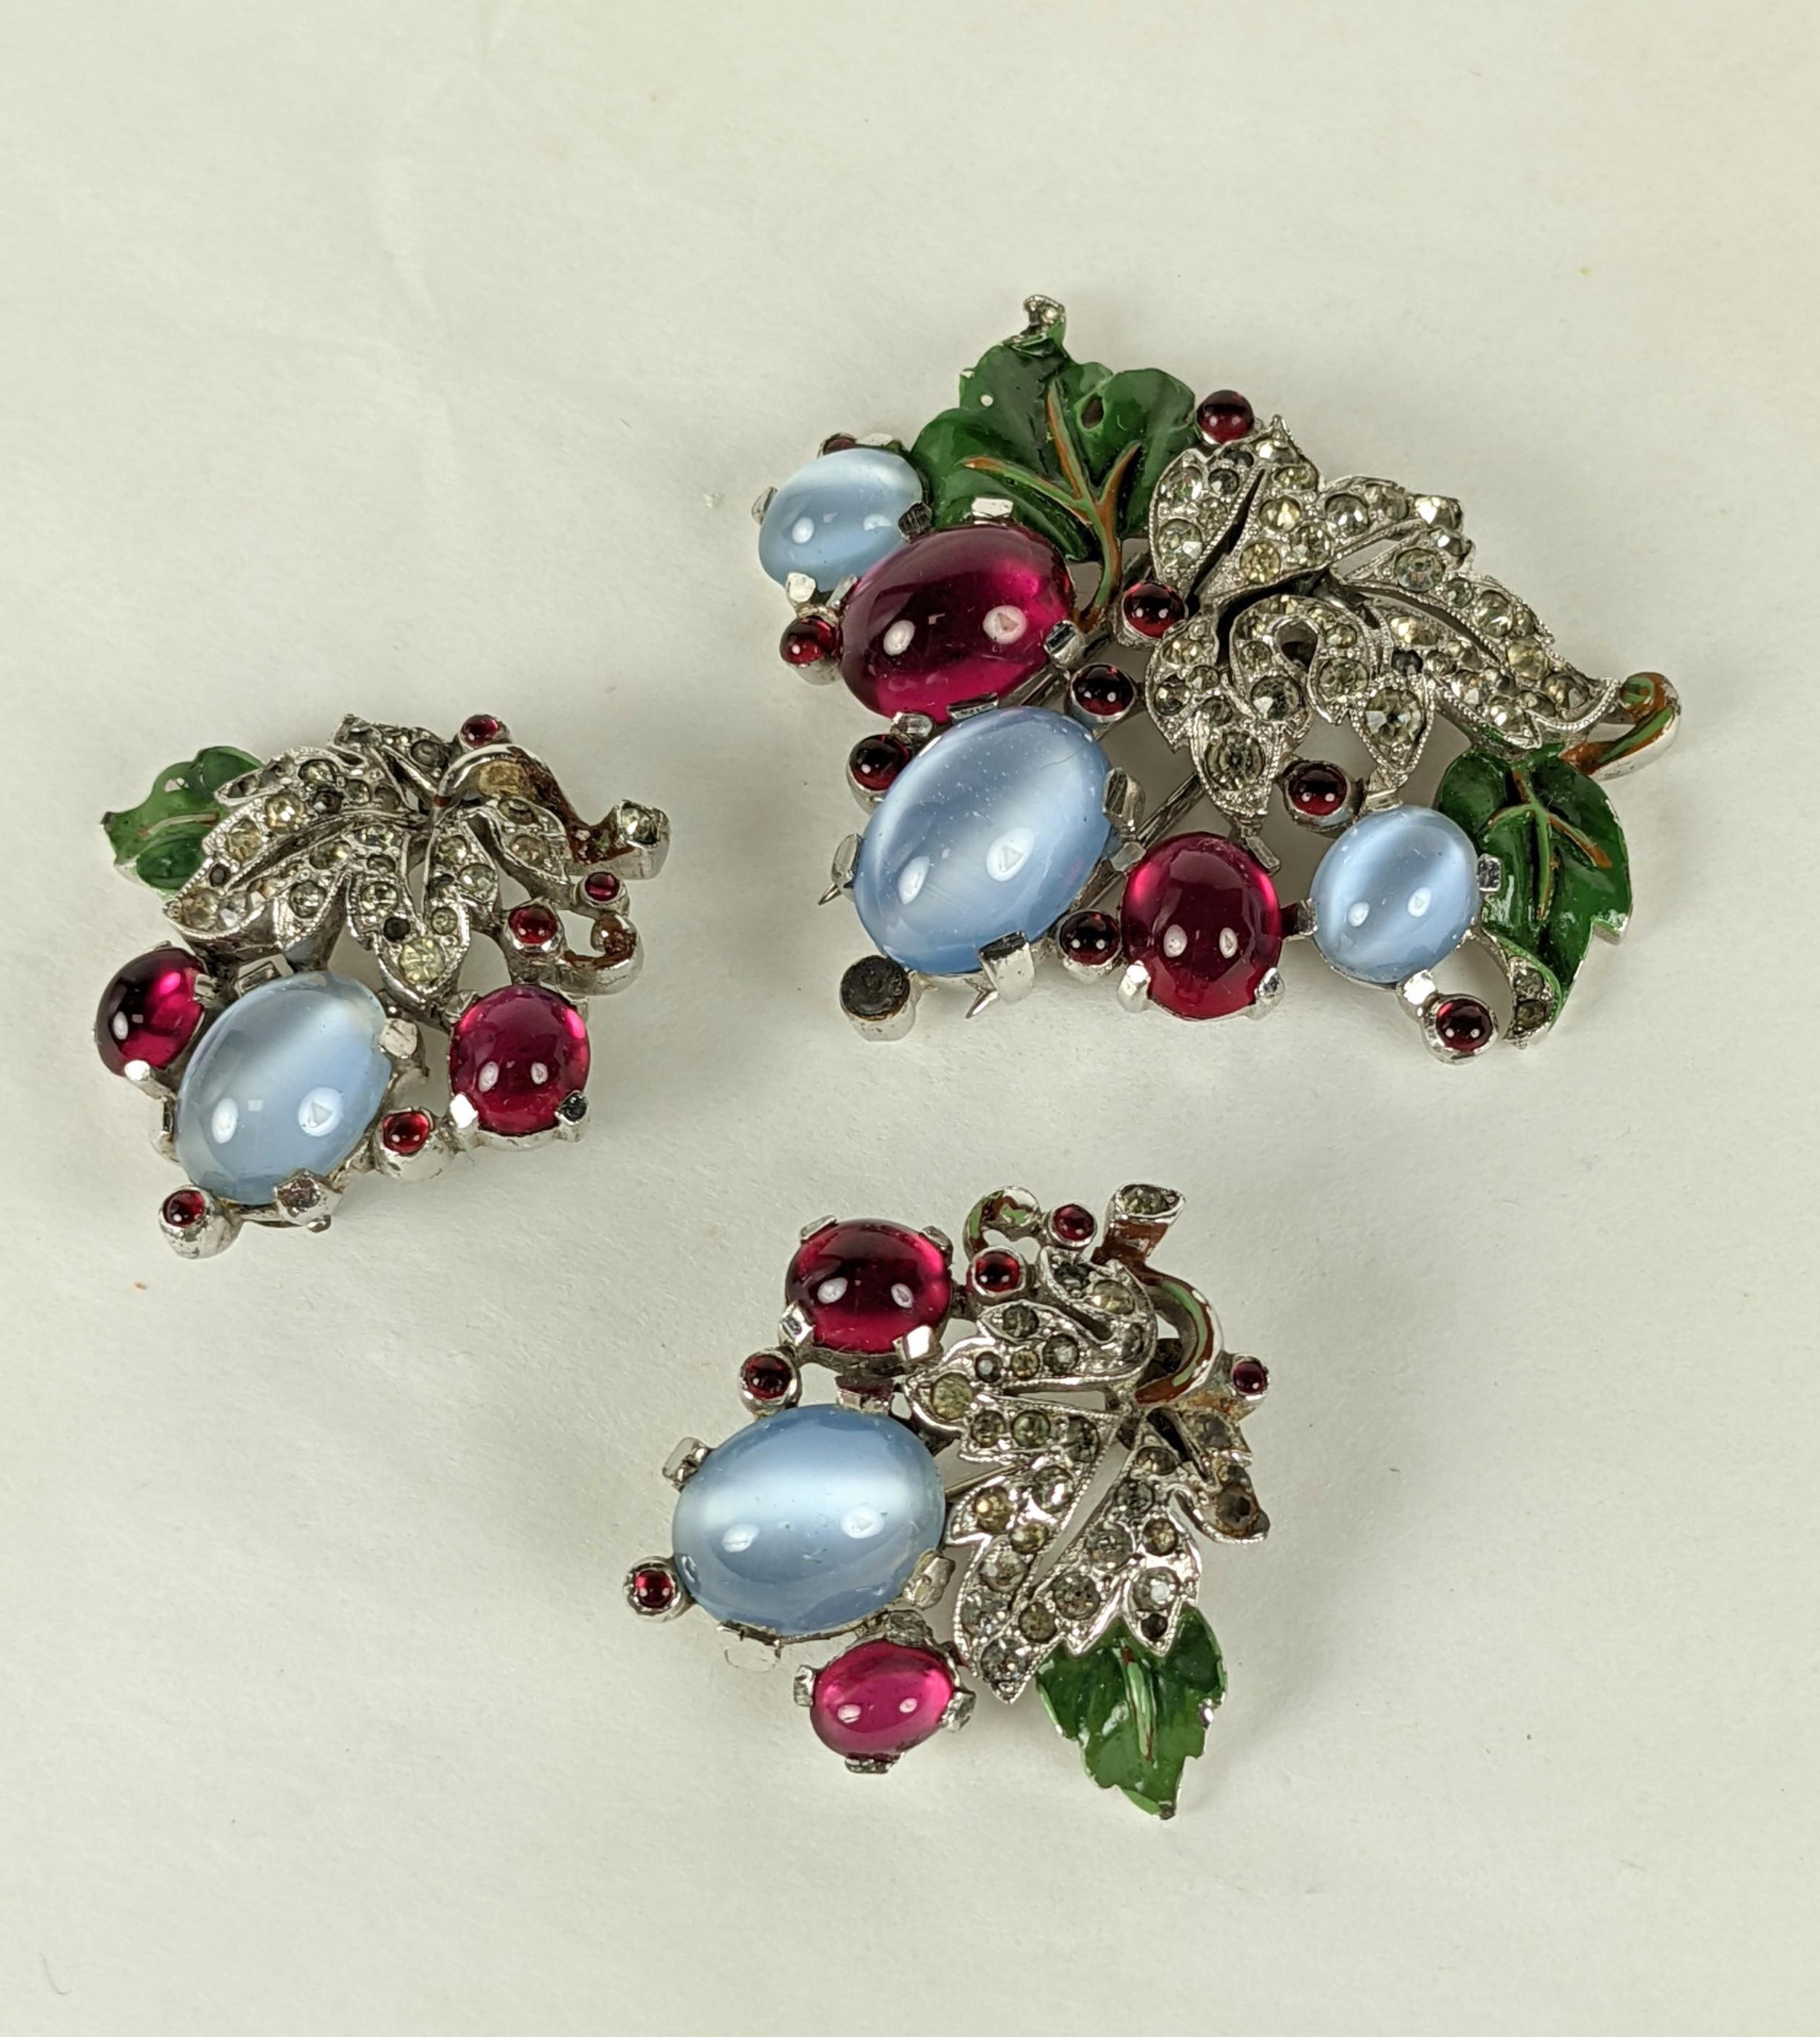 Trifari Cabochon Enamel Clip Set by Alfred Phillipe from the 1930's. Cab faux moonstones and rubies with enamel leaves. One clip with a pair of scatter pins. 1930's USA. 2